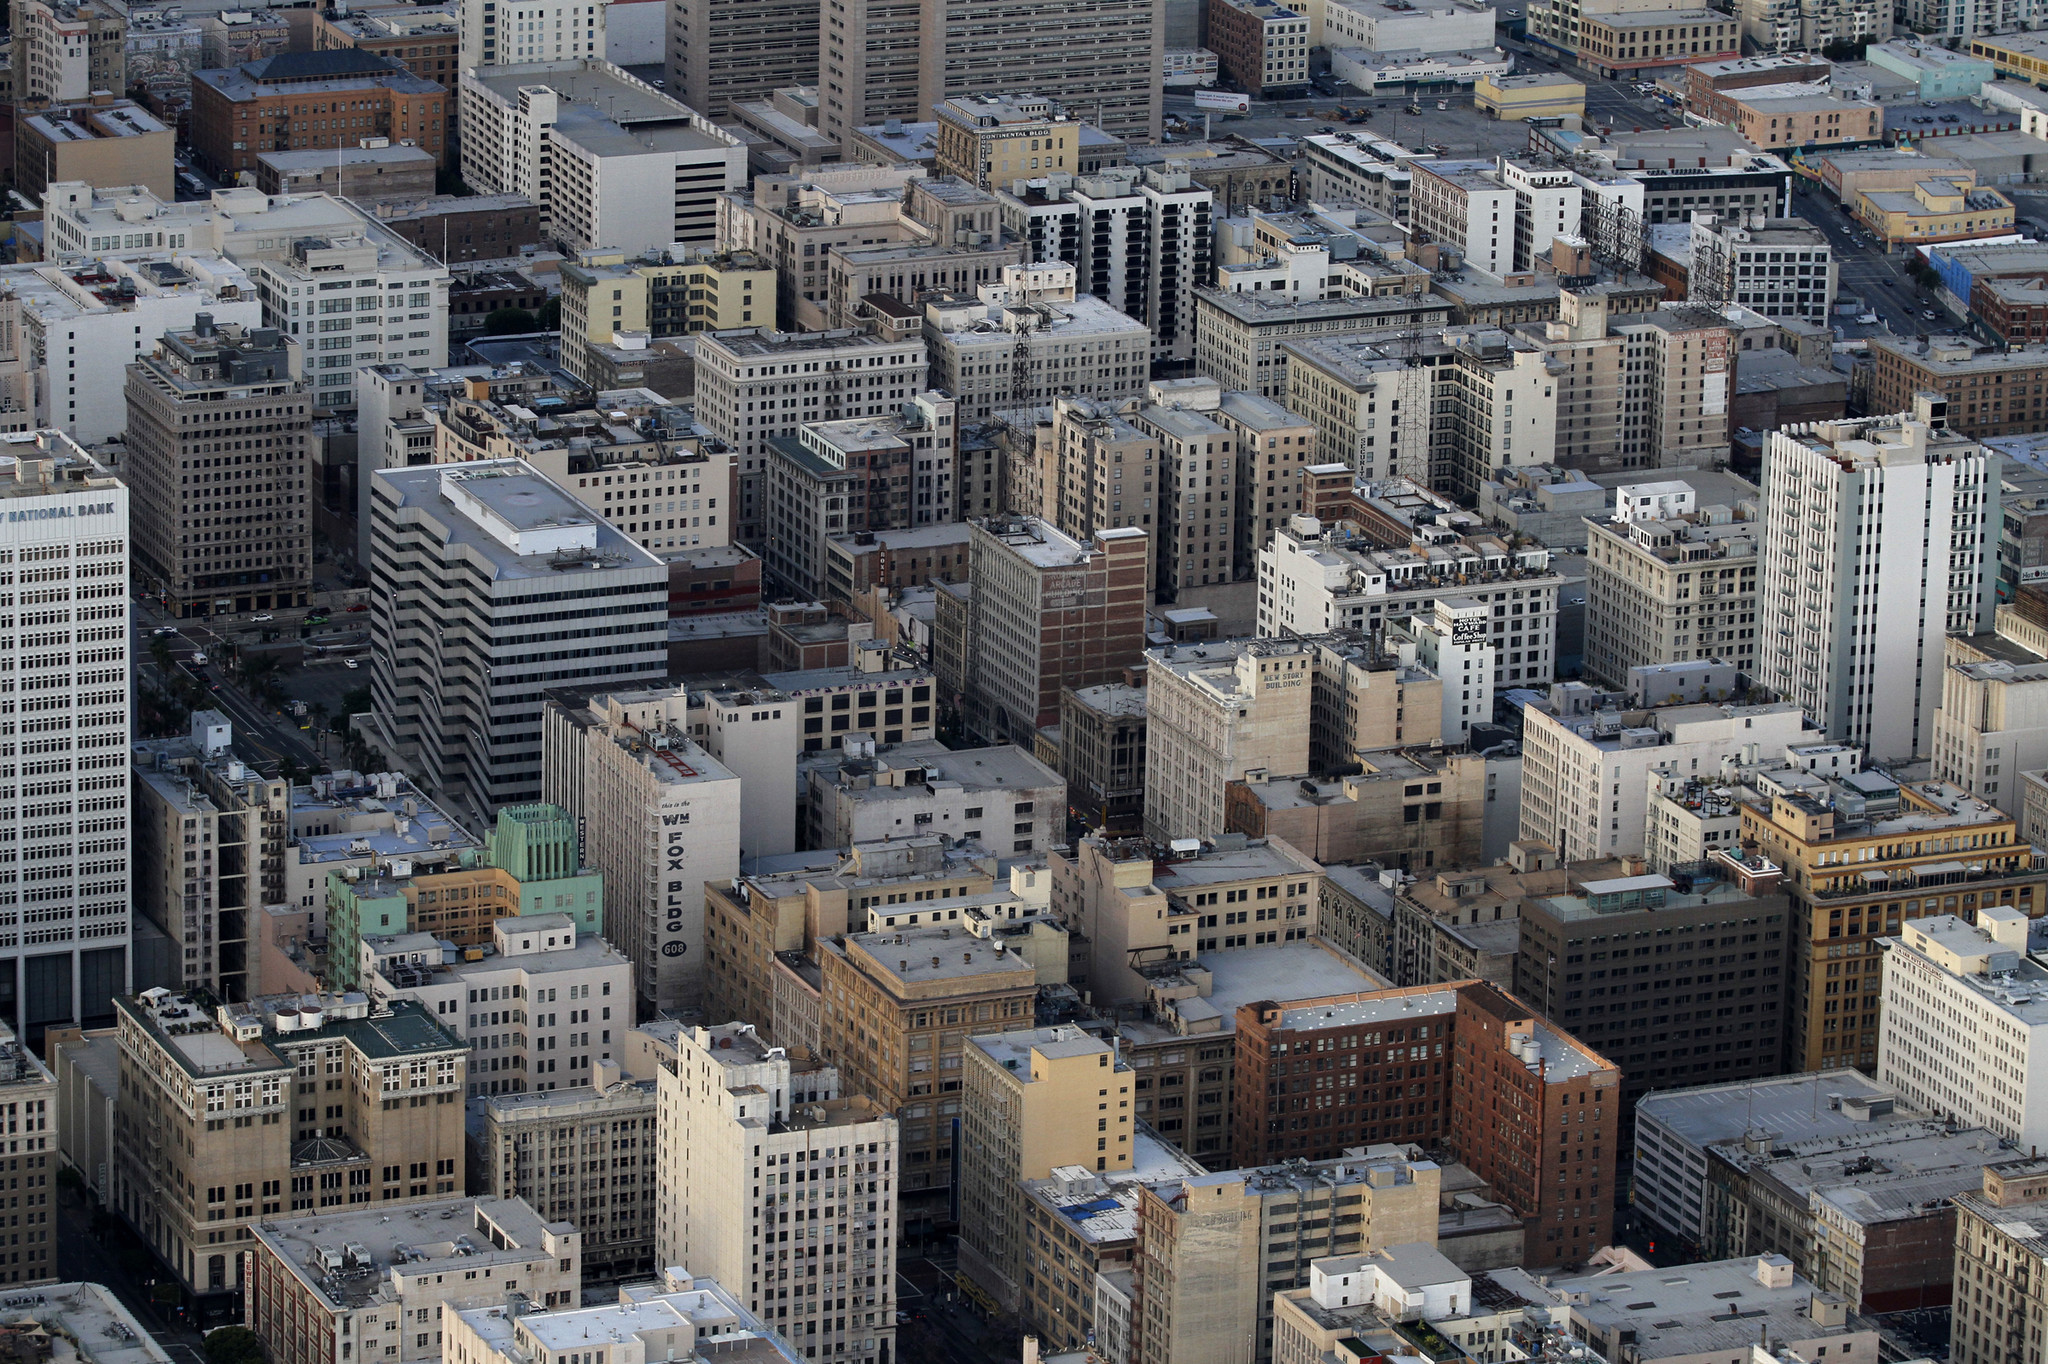 An aerial view shows downtown Los Angeles in 2010.